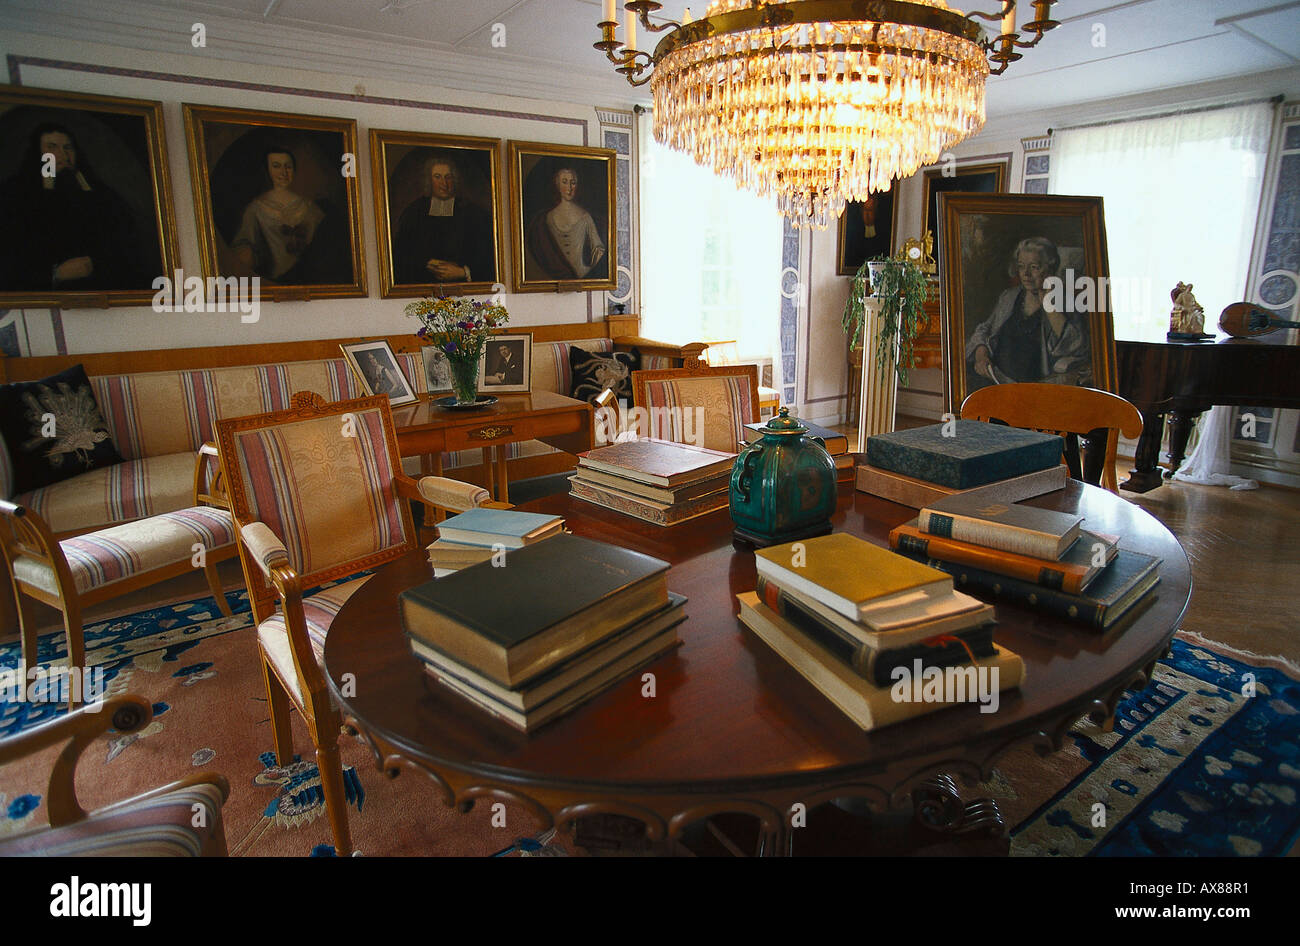 Interior view of the parlour at Selma Lagerloefs house Marbacka, Vaermland, Sweden, Europe Stock Photo